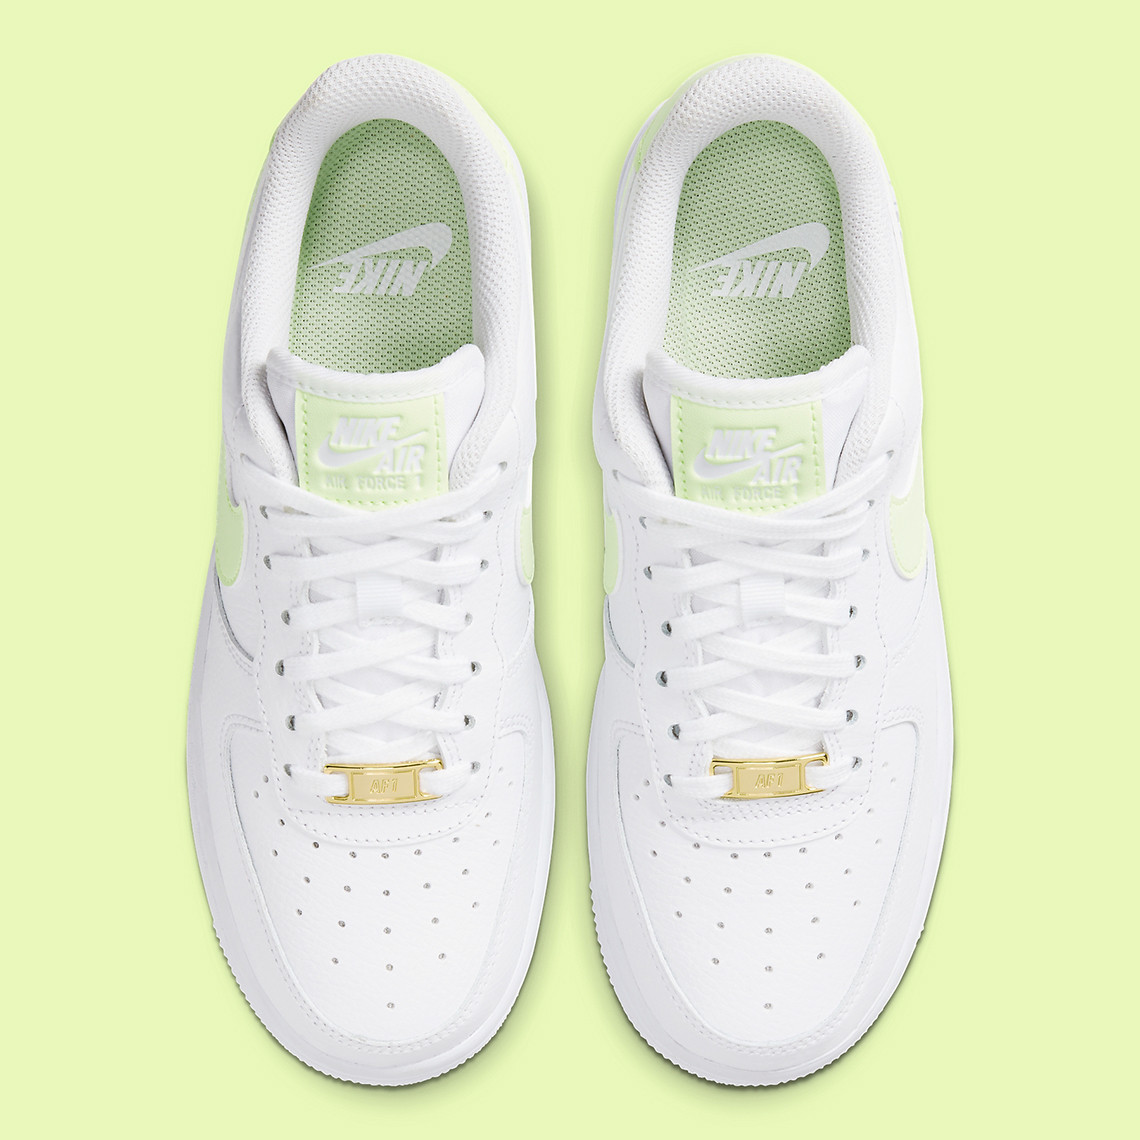 Nike Adds “Barely Volt” Accents To Its Air Force 1 Lows